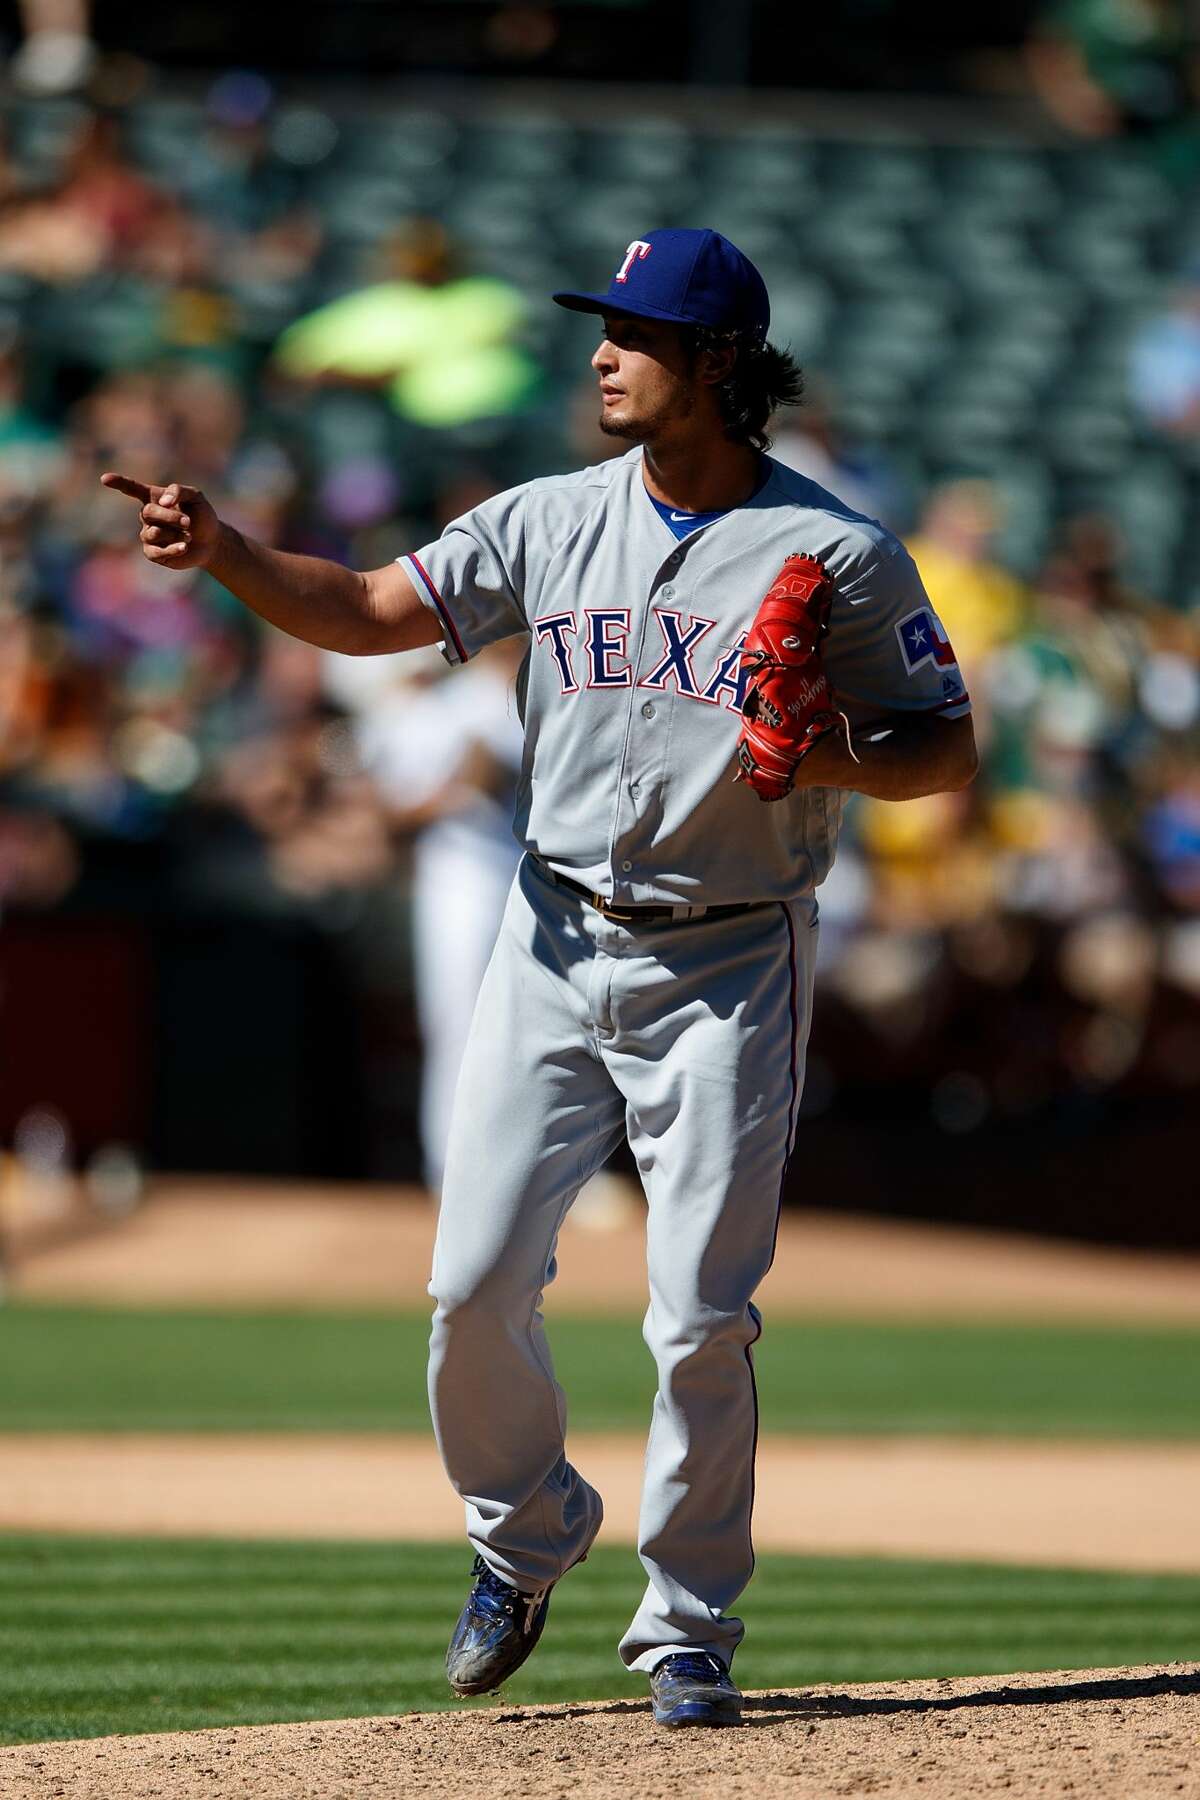 OAKLAND, CA - SEPTEMBER 24: Yu Darvish #11 of the Texas Rangers celebrates after striking out Yonder Alonso (not pictured) of the Oakland Athletics during the seventh inning at the Oakland Coliseum on September 24, 2016 in Oakland, California. The Texas Rangers defeated the Oakland Athletics 5-0. (Photo by Jason O. Watson/Getty Images)